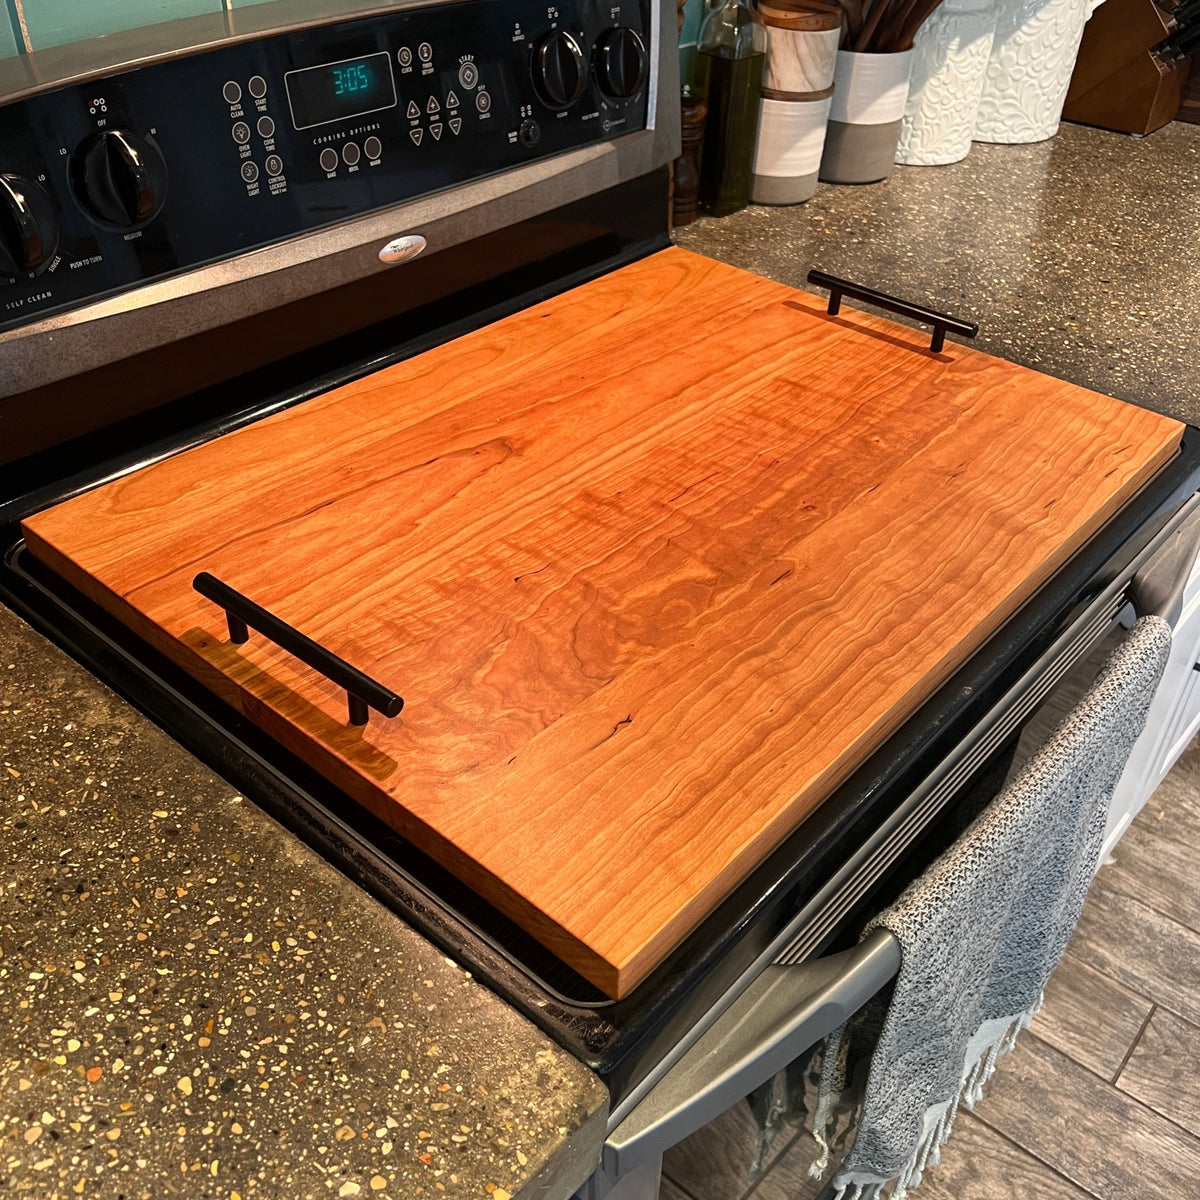 Cherry Noodle Board - Stovetop Cover - Cutting Board - Serving Tray